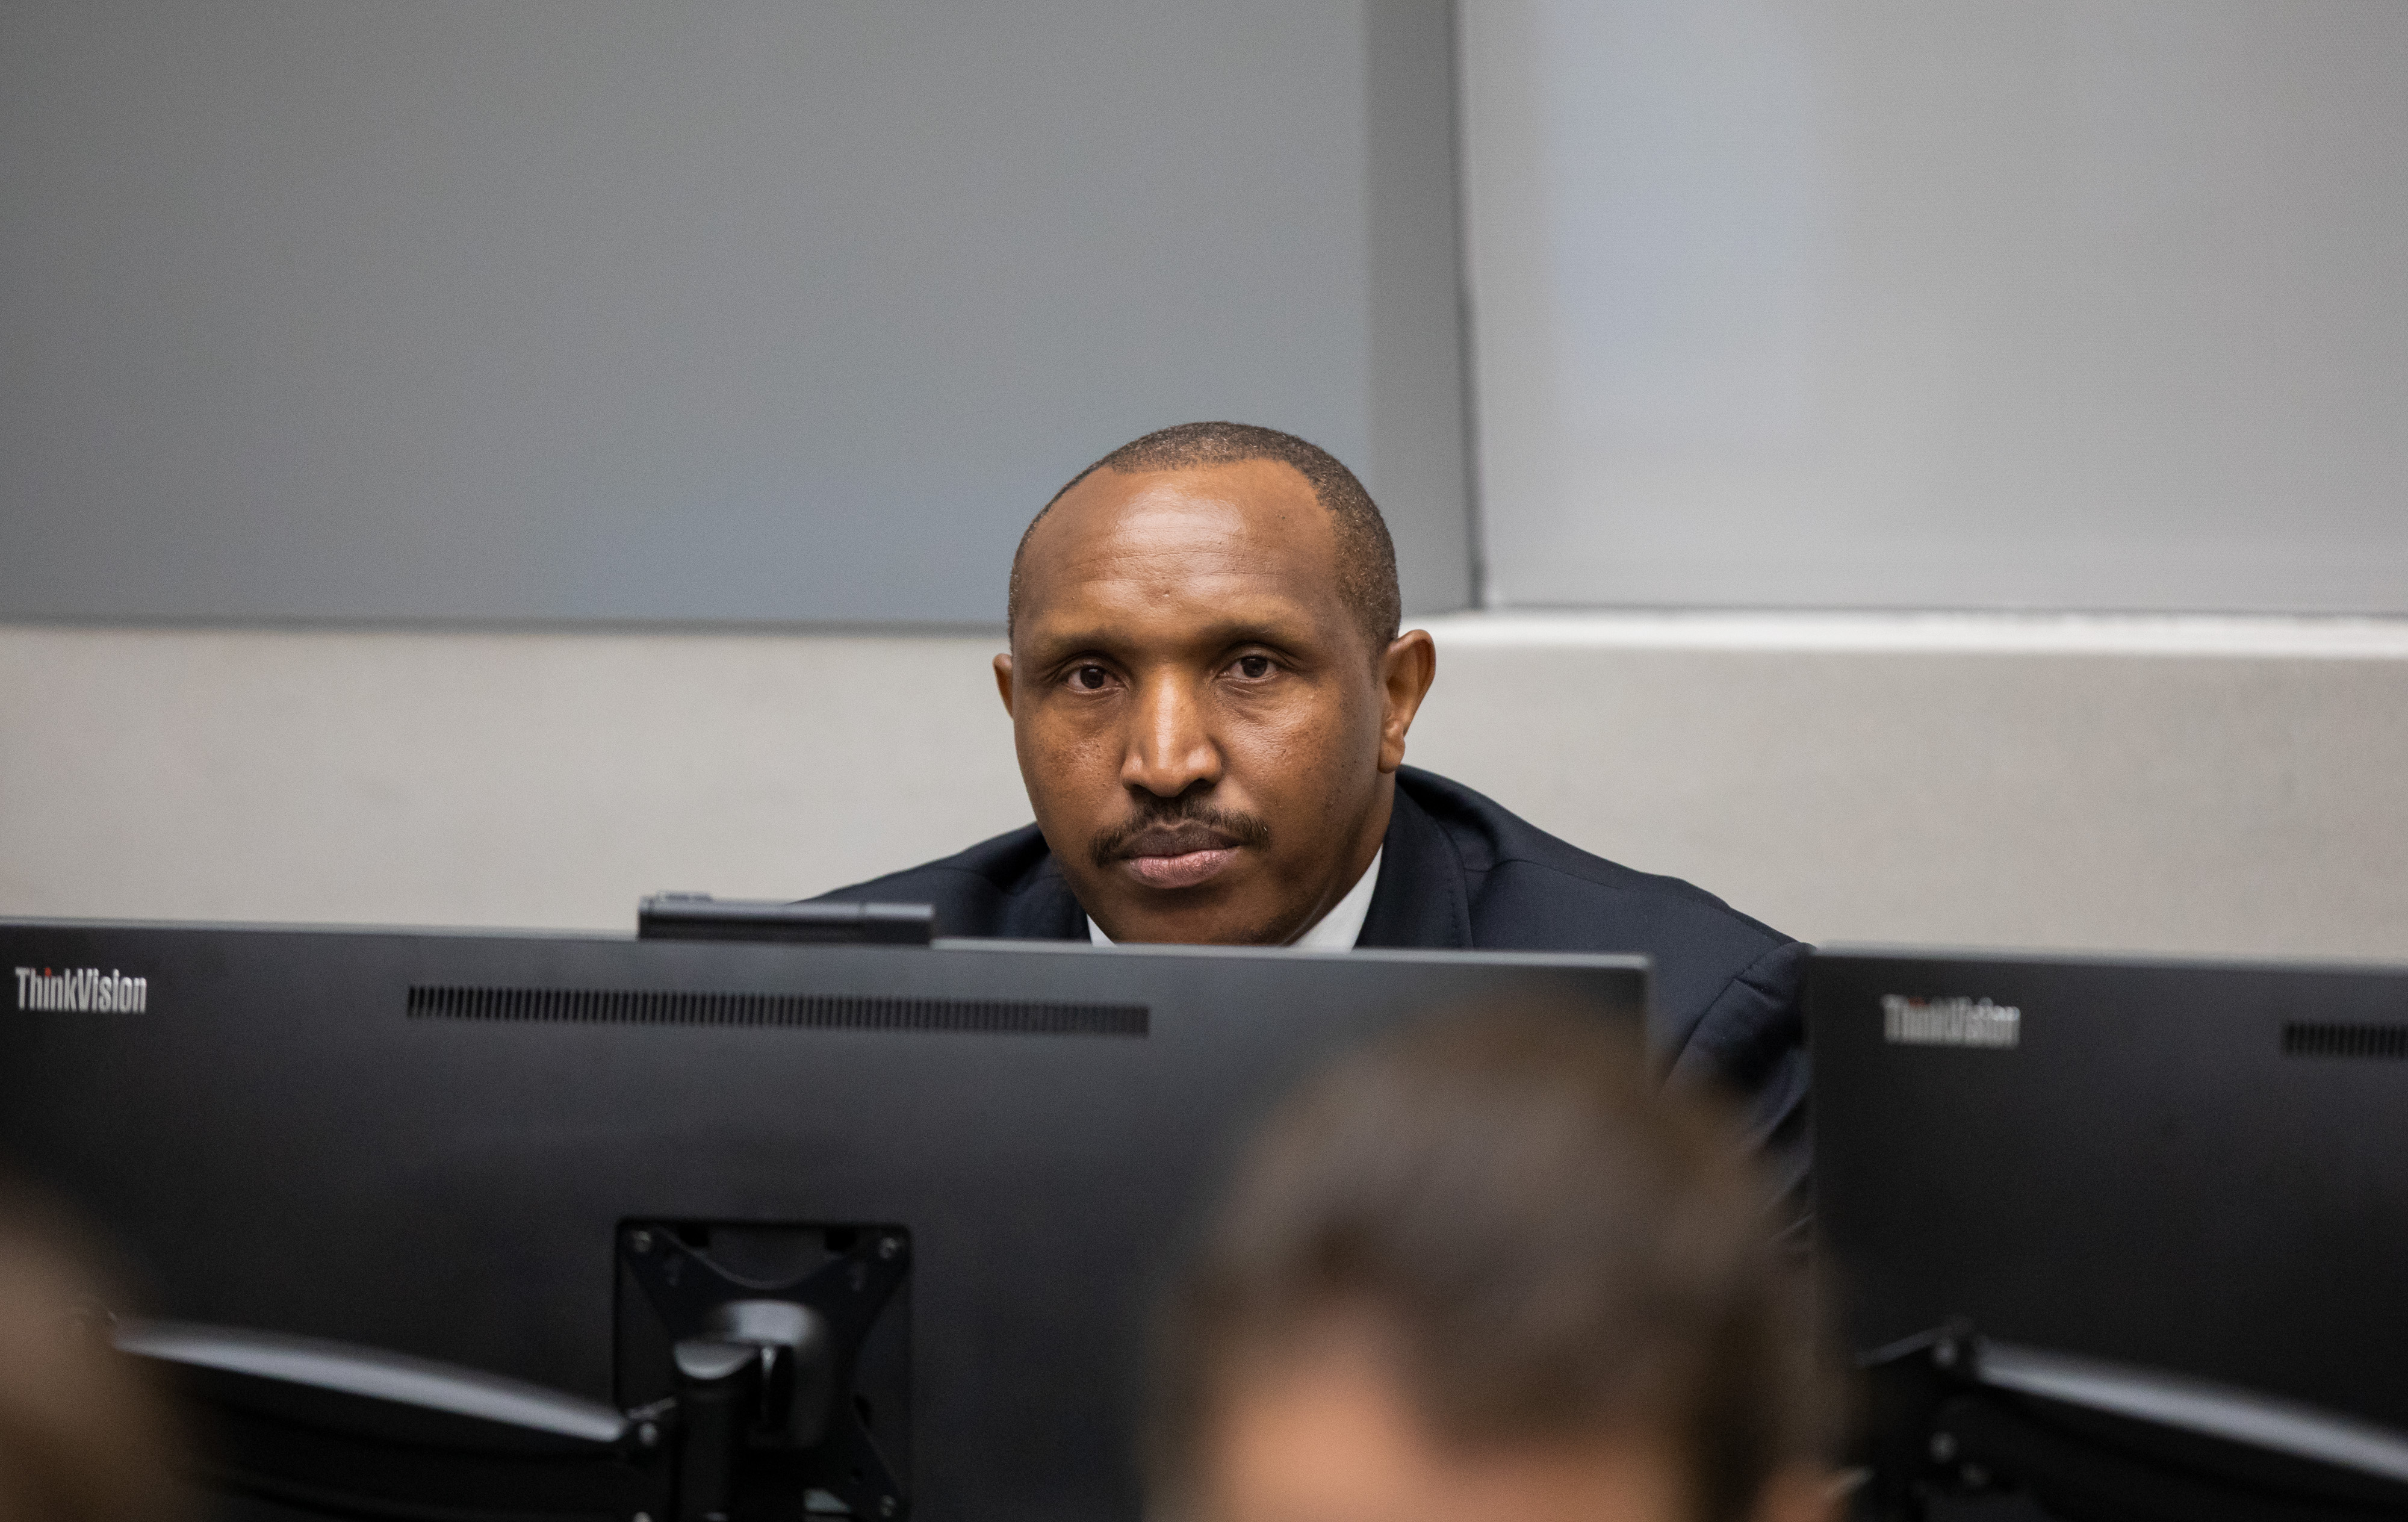 Bosco Ntaganda during the delivering of the judgment of ICC Trial Chamber VI at the seat of the Court in The Hague (The Netherlands) on 8 July 2019 ©ICC-CPI